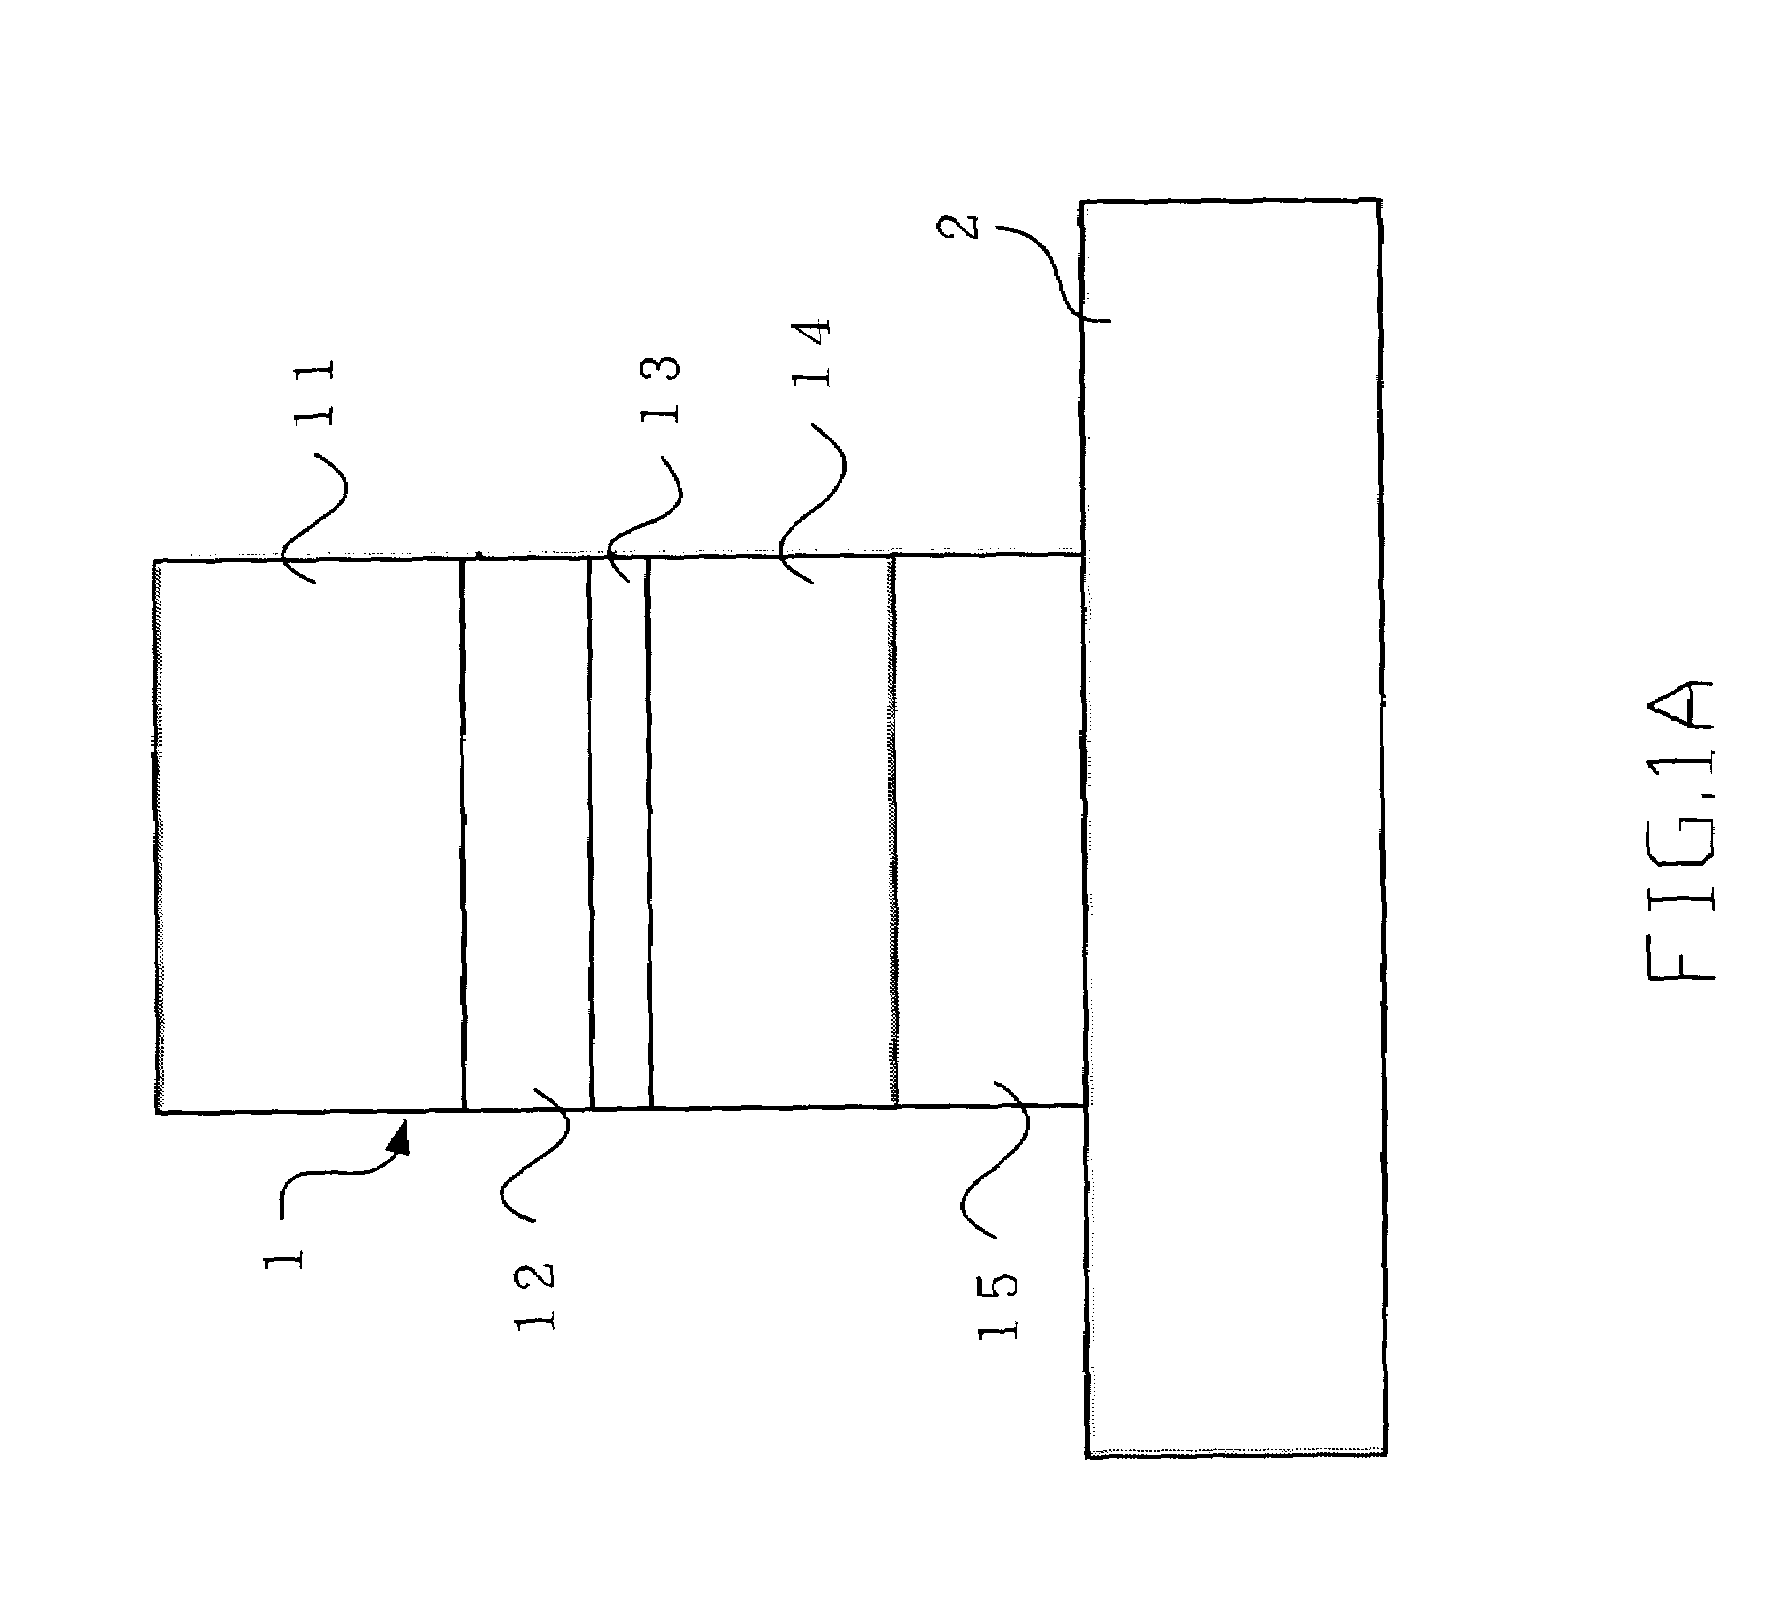 High-speed electro-absorption modulator with low drive voltage